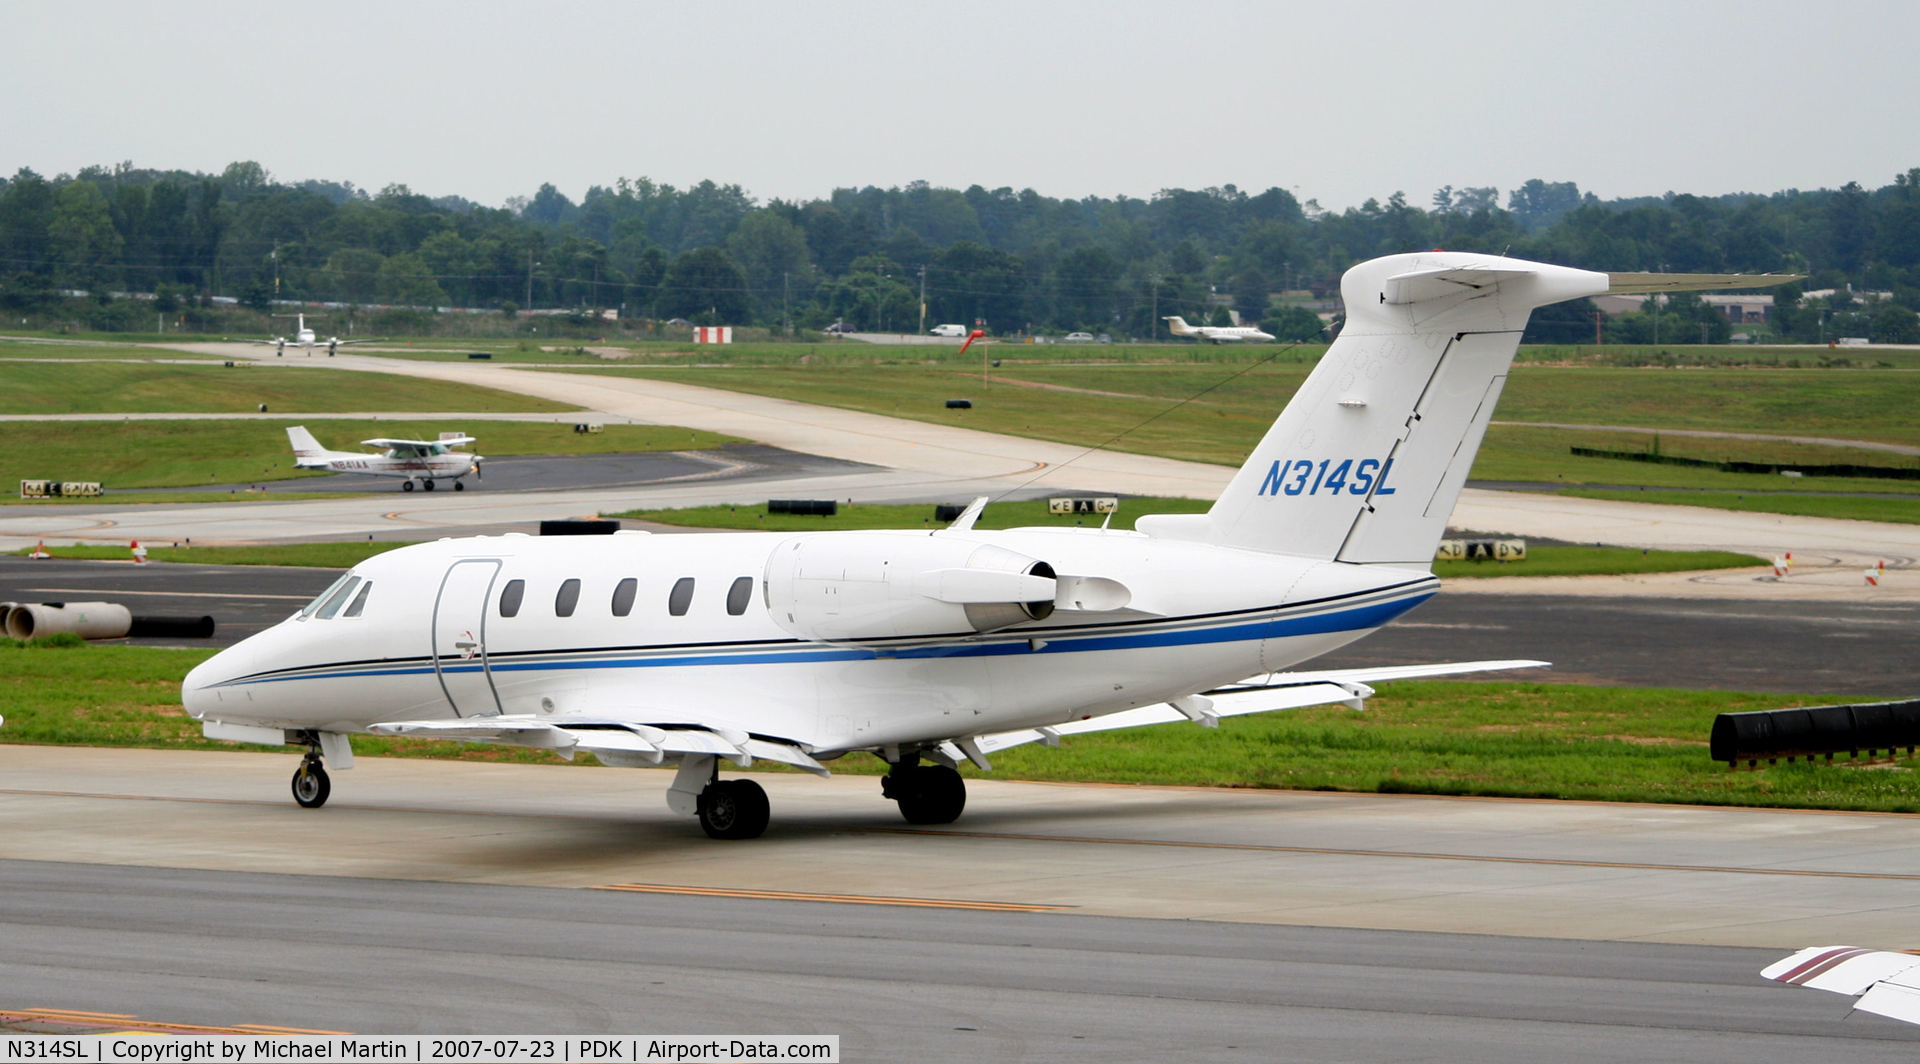 N314SL, 2000 Cessna 650 C/N 650-7115, Taxing to Epps Air Service